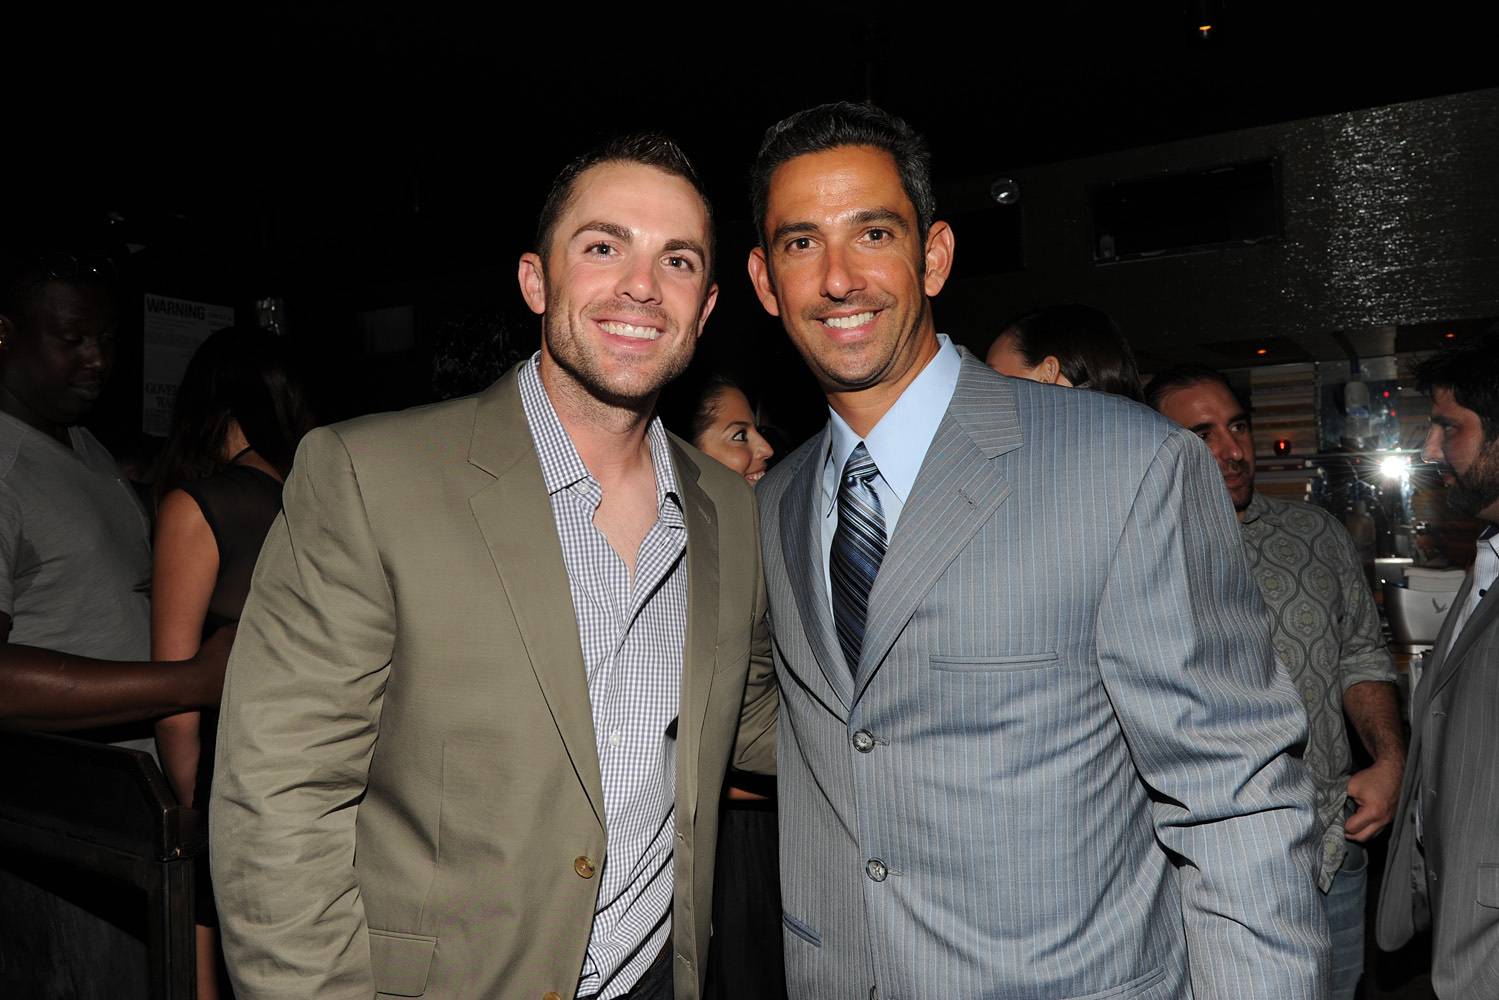 David Wright and Jorge Posada attend ACES All Stars 2013 at Marquee, on Sunday, July 14, 2013 in New York. (Photo by Evan Agnosti/Invision for ACES, Inc/AP Images)